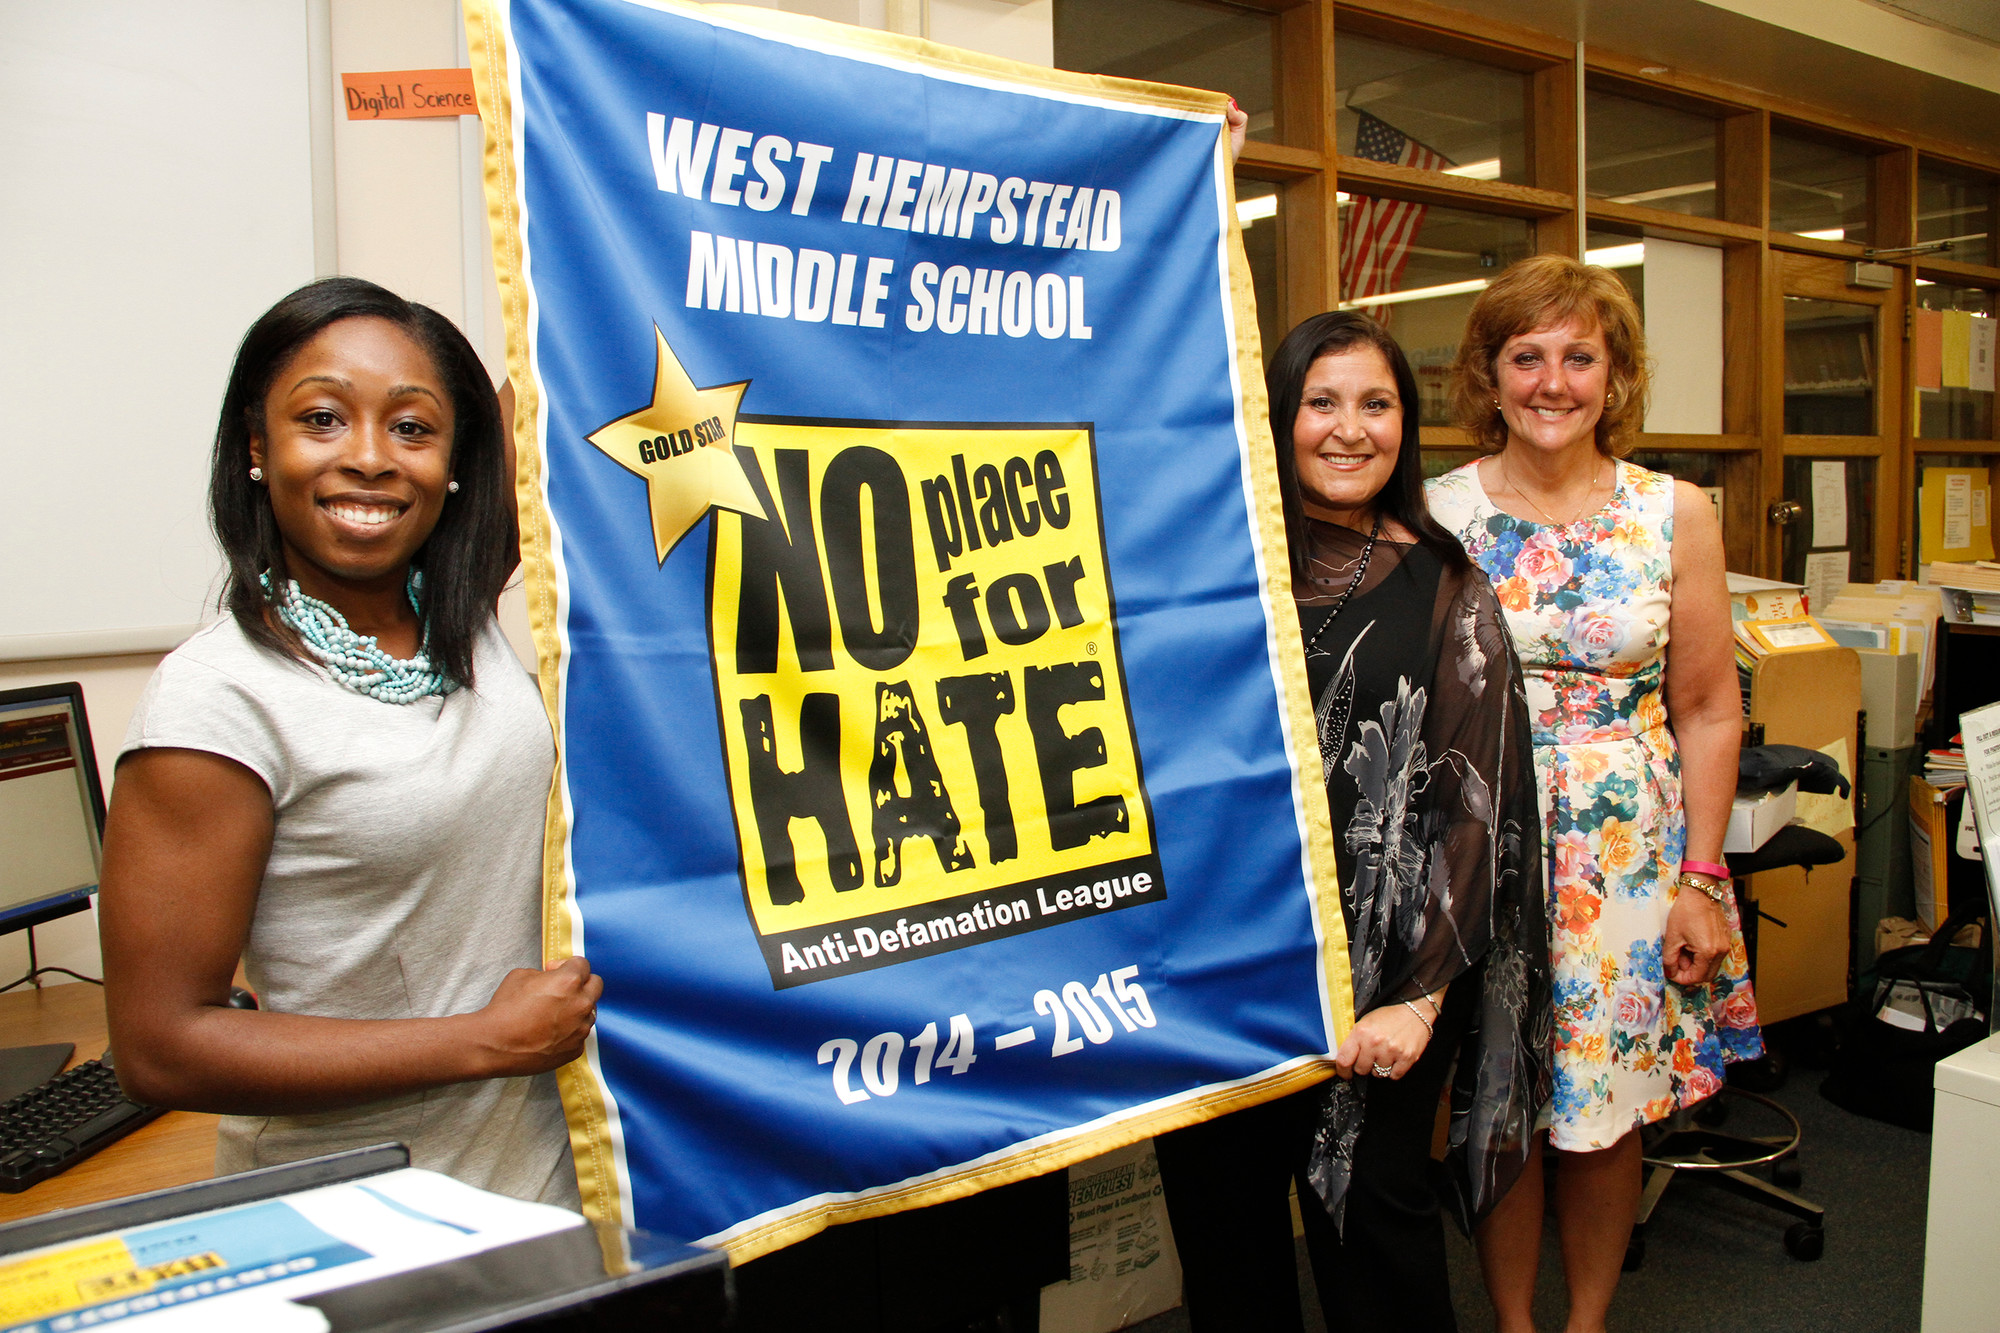 Amanda Holder, Cari Lubliner and Principal Teresa Grossane with West Hempstead Middle School's newly-aquired No Place for Hate banner from the Anti-Defamation League.